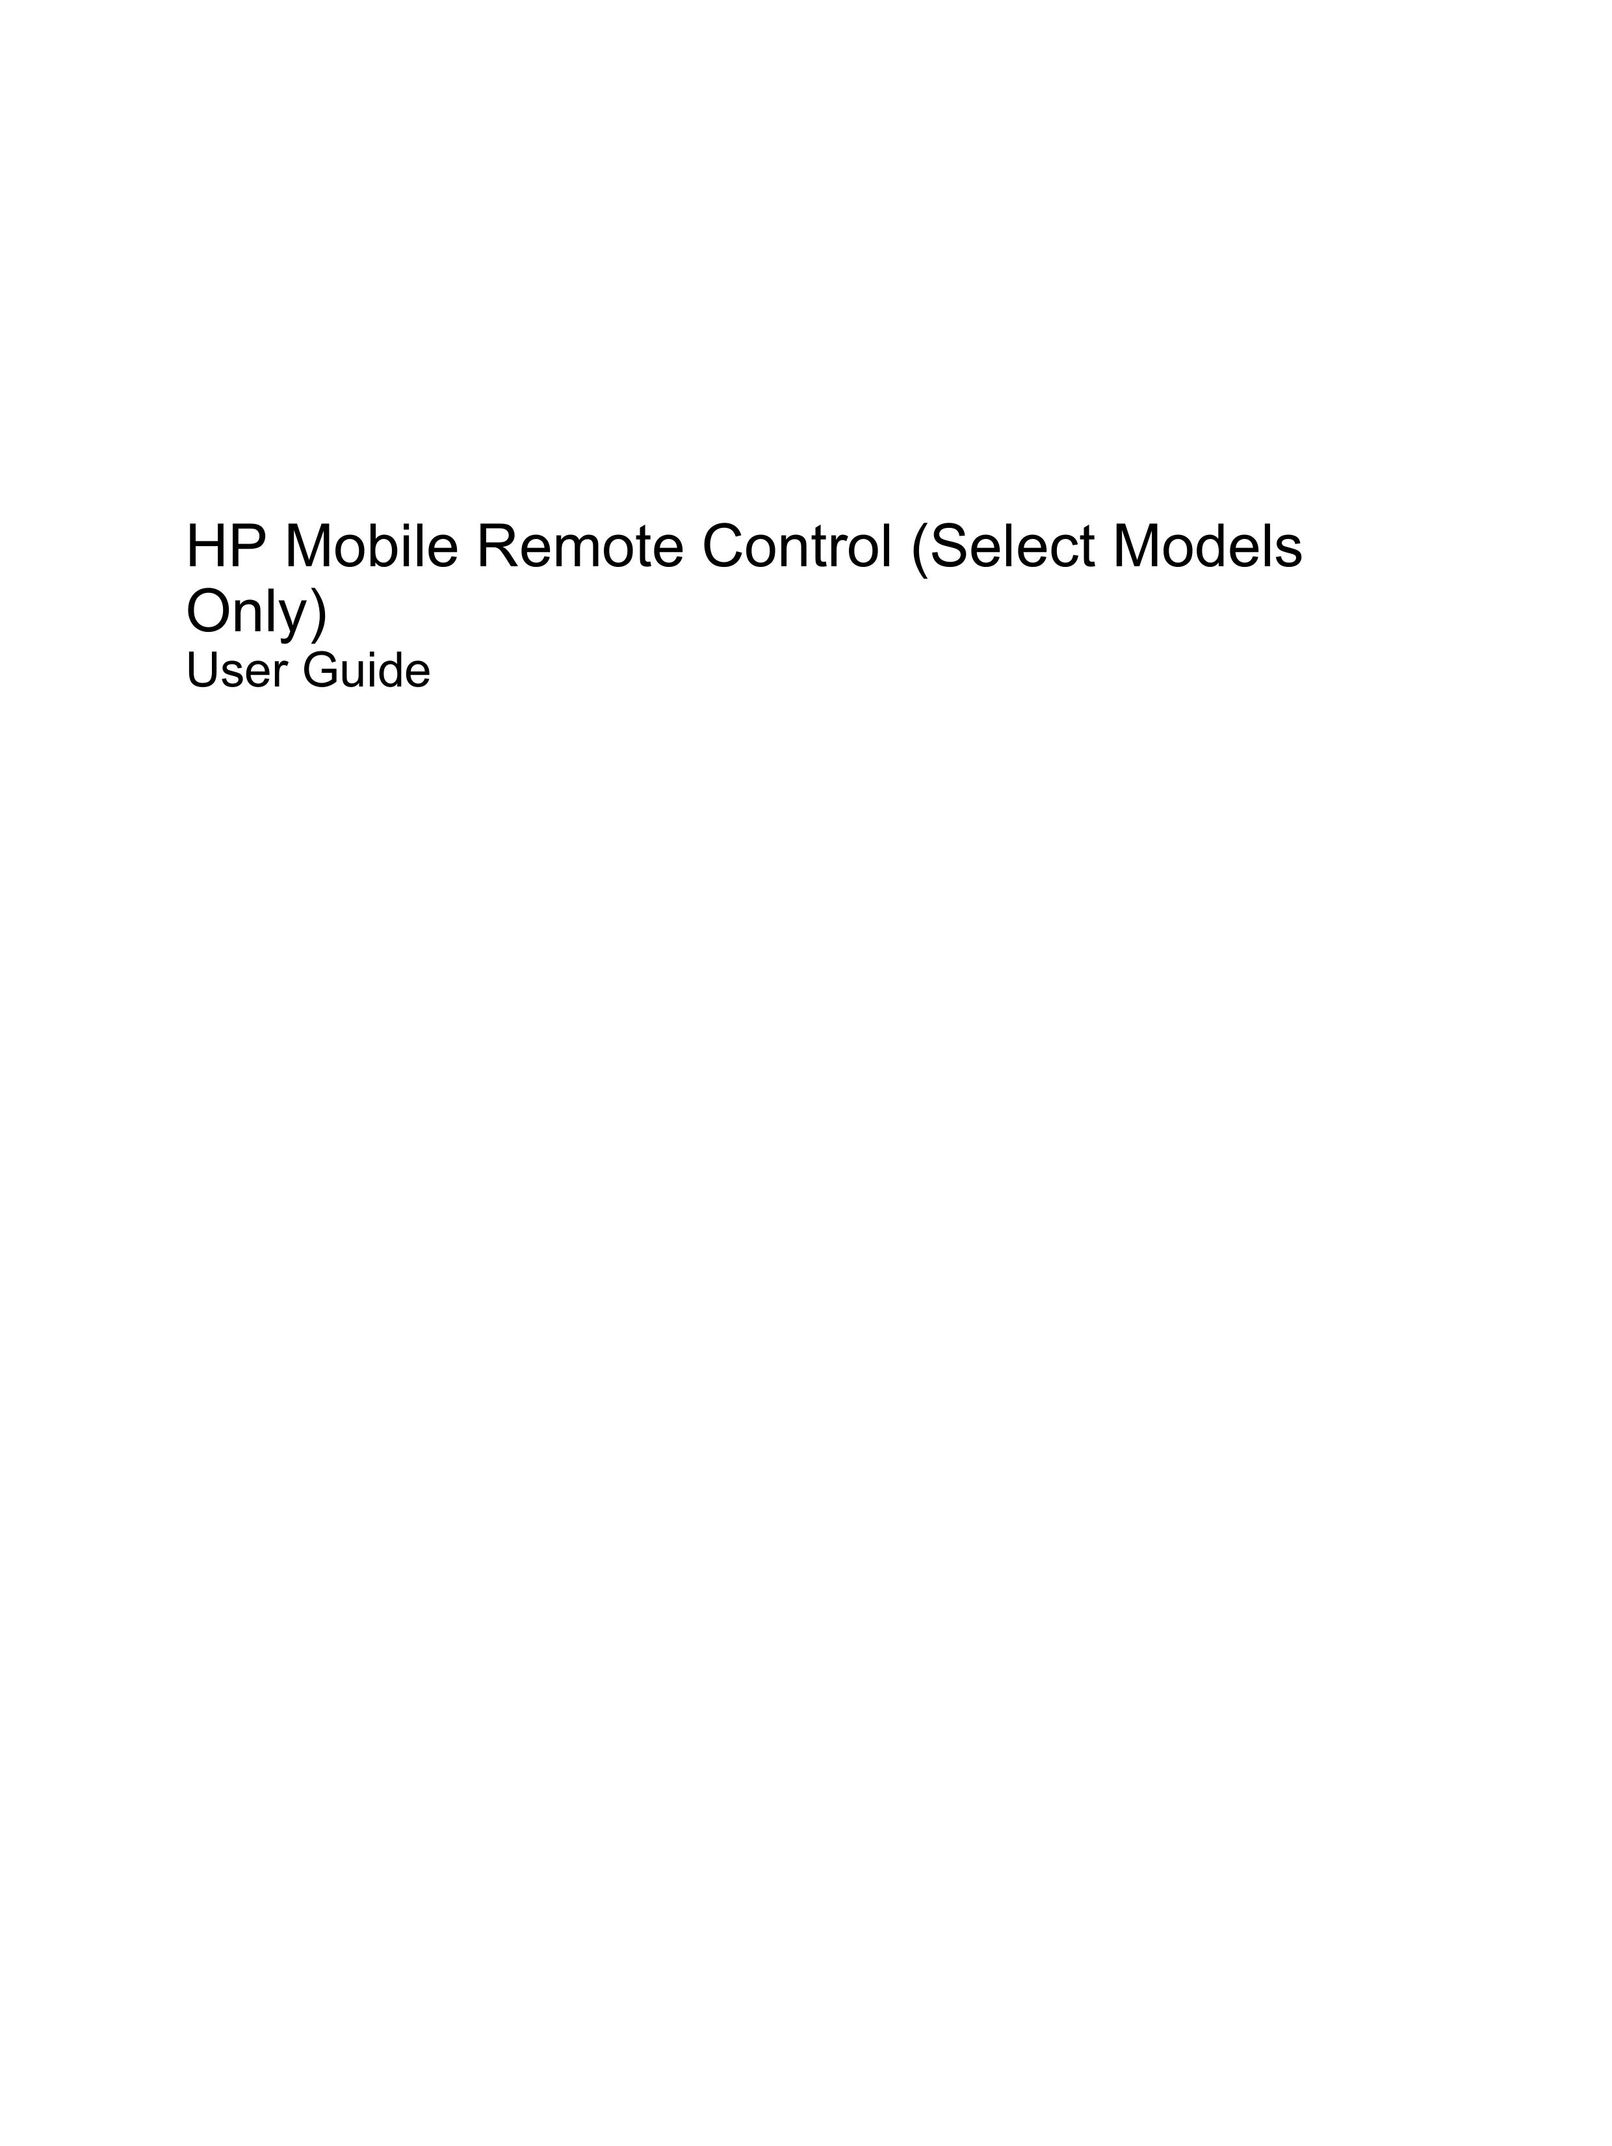 HP (Hewlett-Packard) HP Mobile Remote Control Universal Remote User Manual